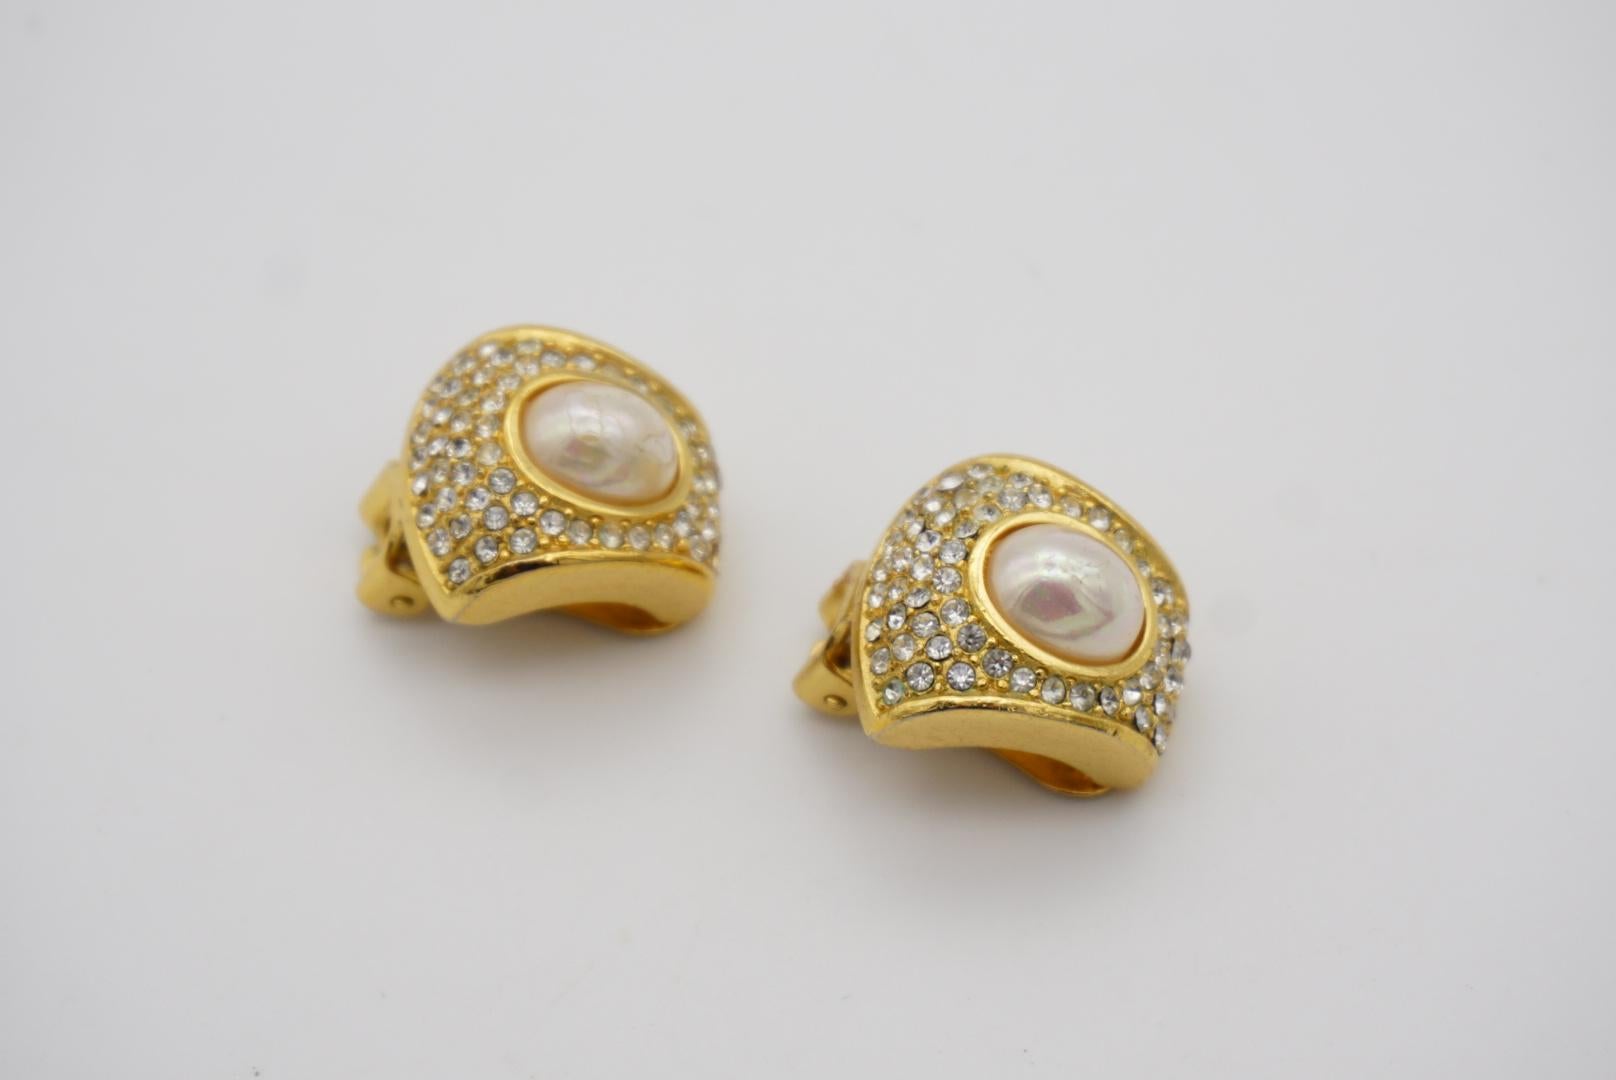 Christian Dior Vintage 1980s White Oval Pearl Crystals Fan Gold Clip Earrings For Sale 4